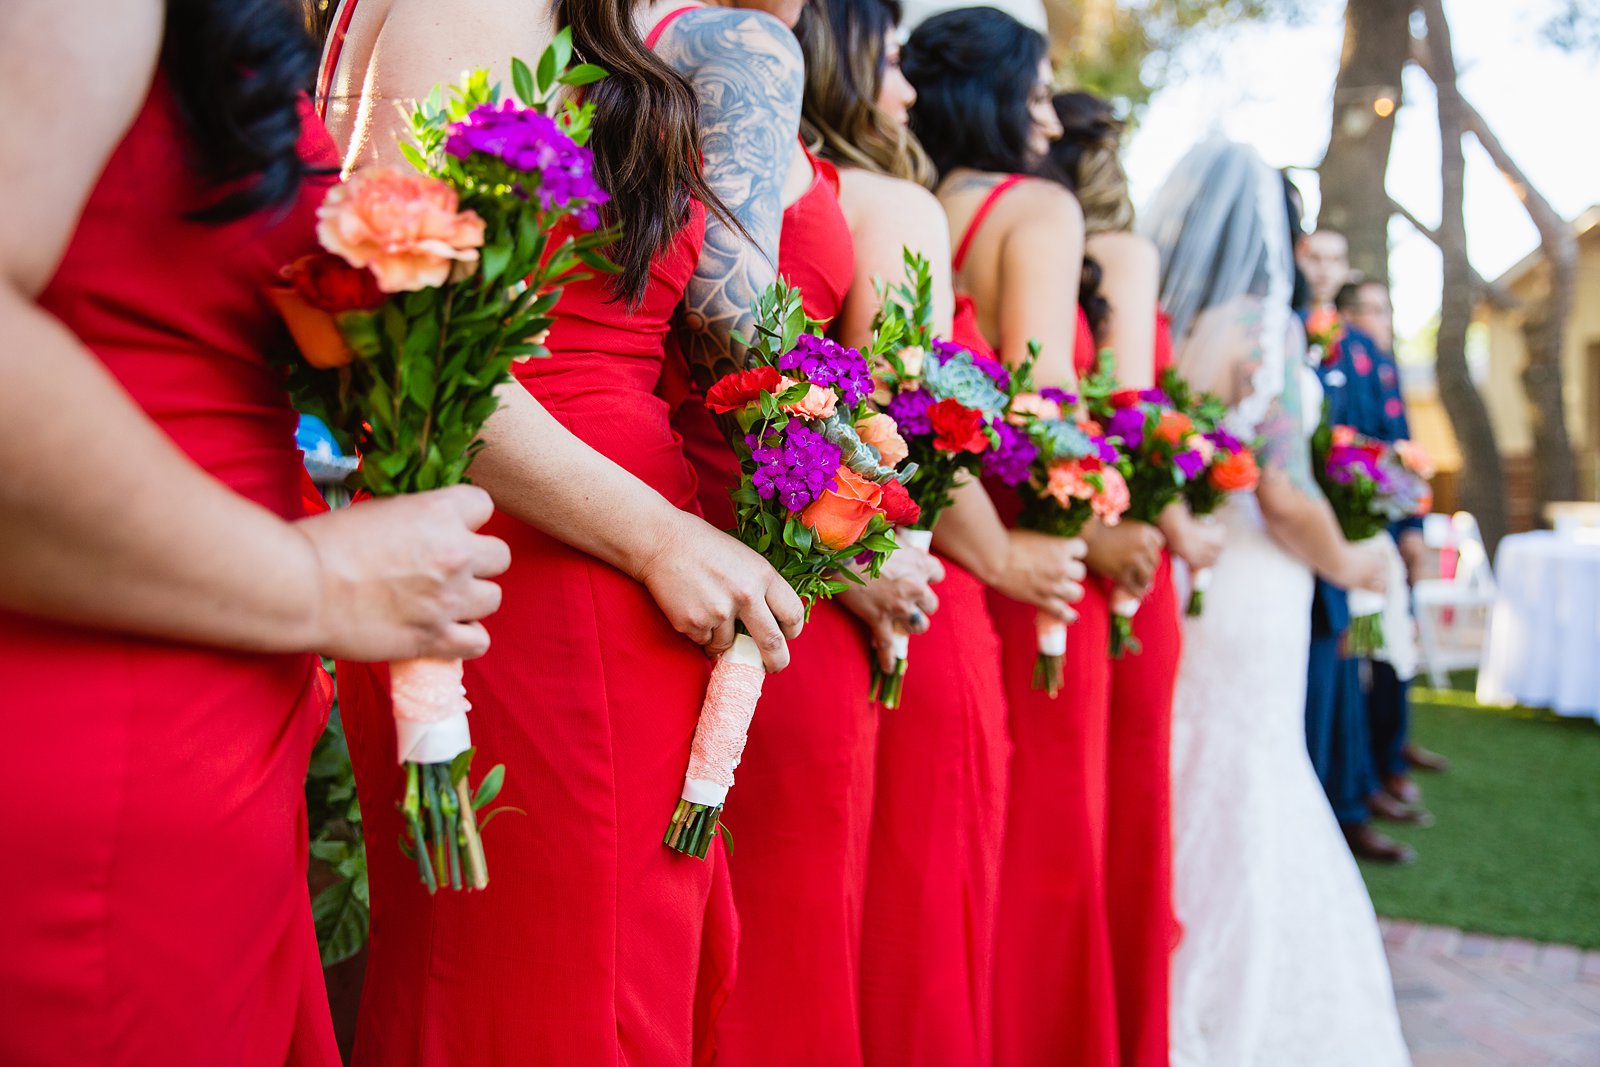 Fiesta bridal party bouquets and red dresses by PMA Photography.